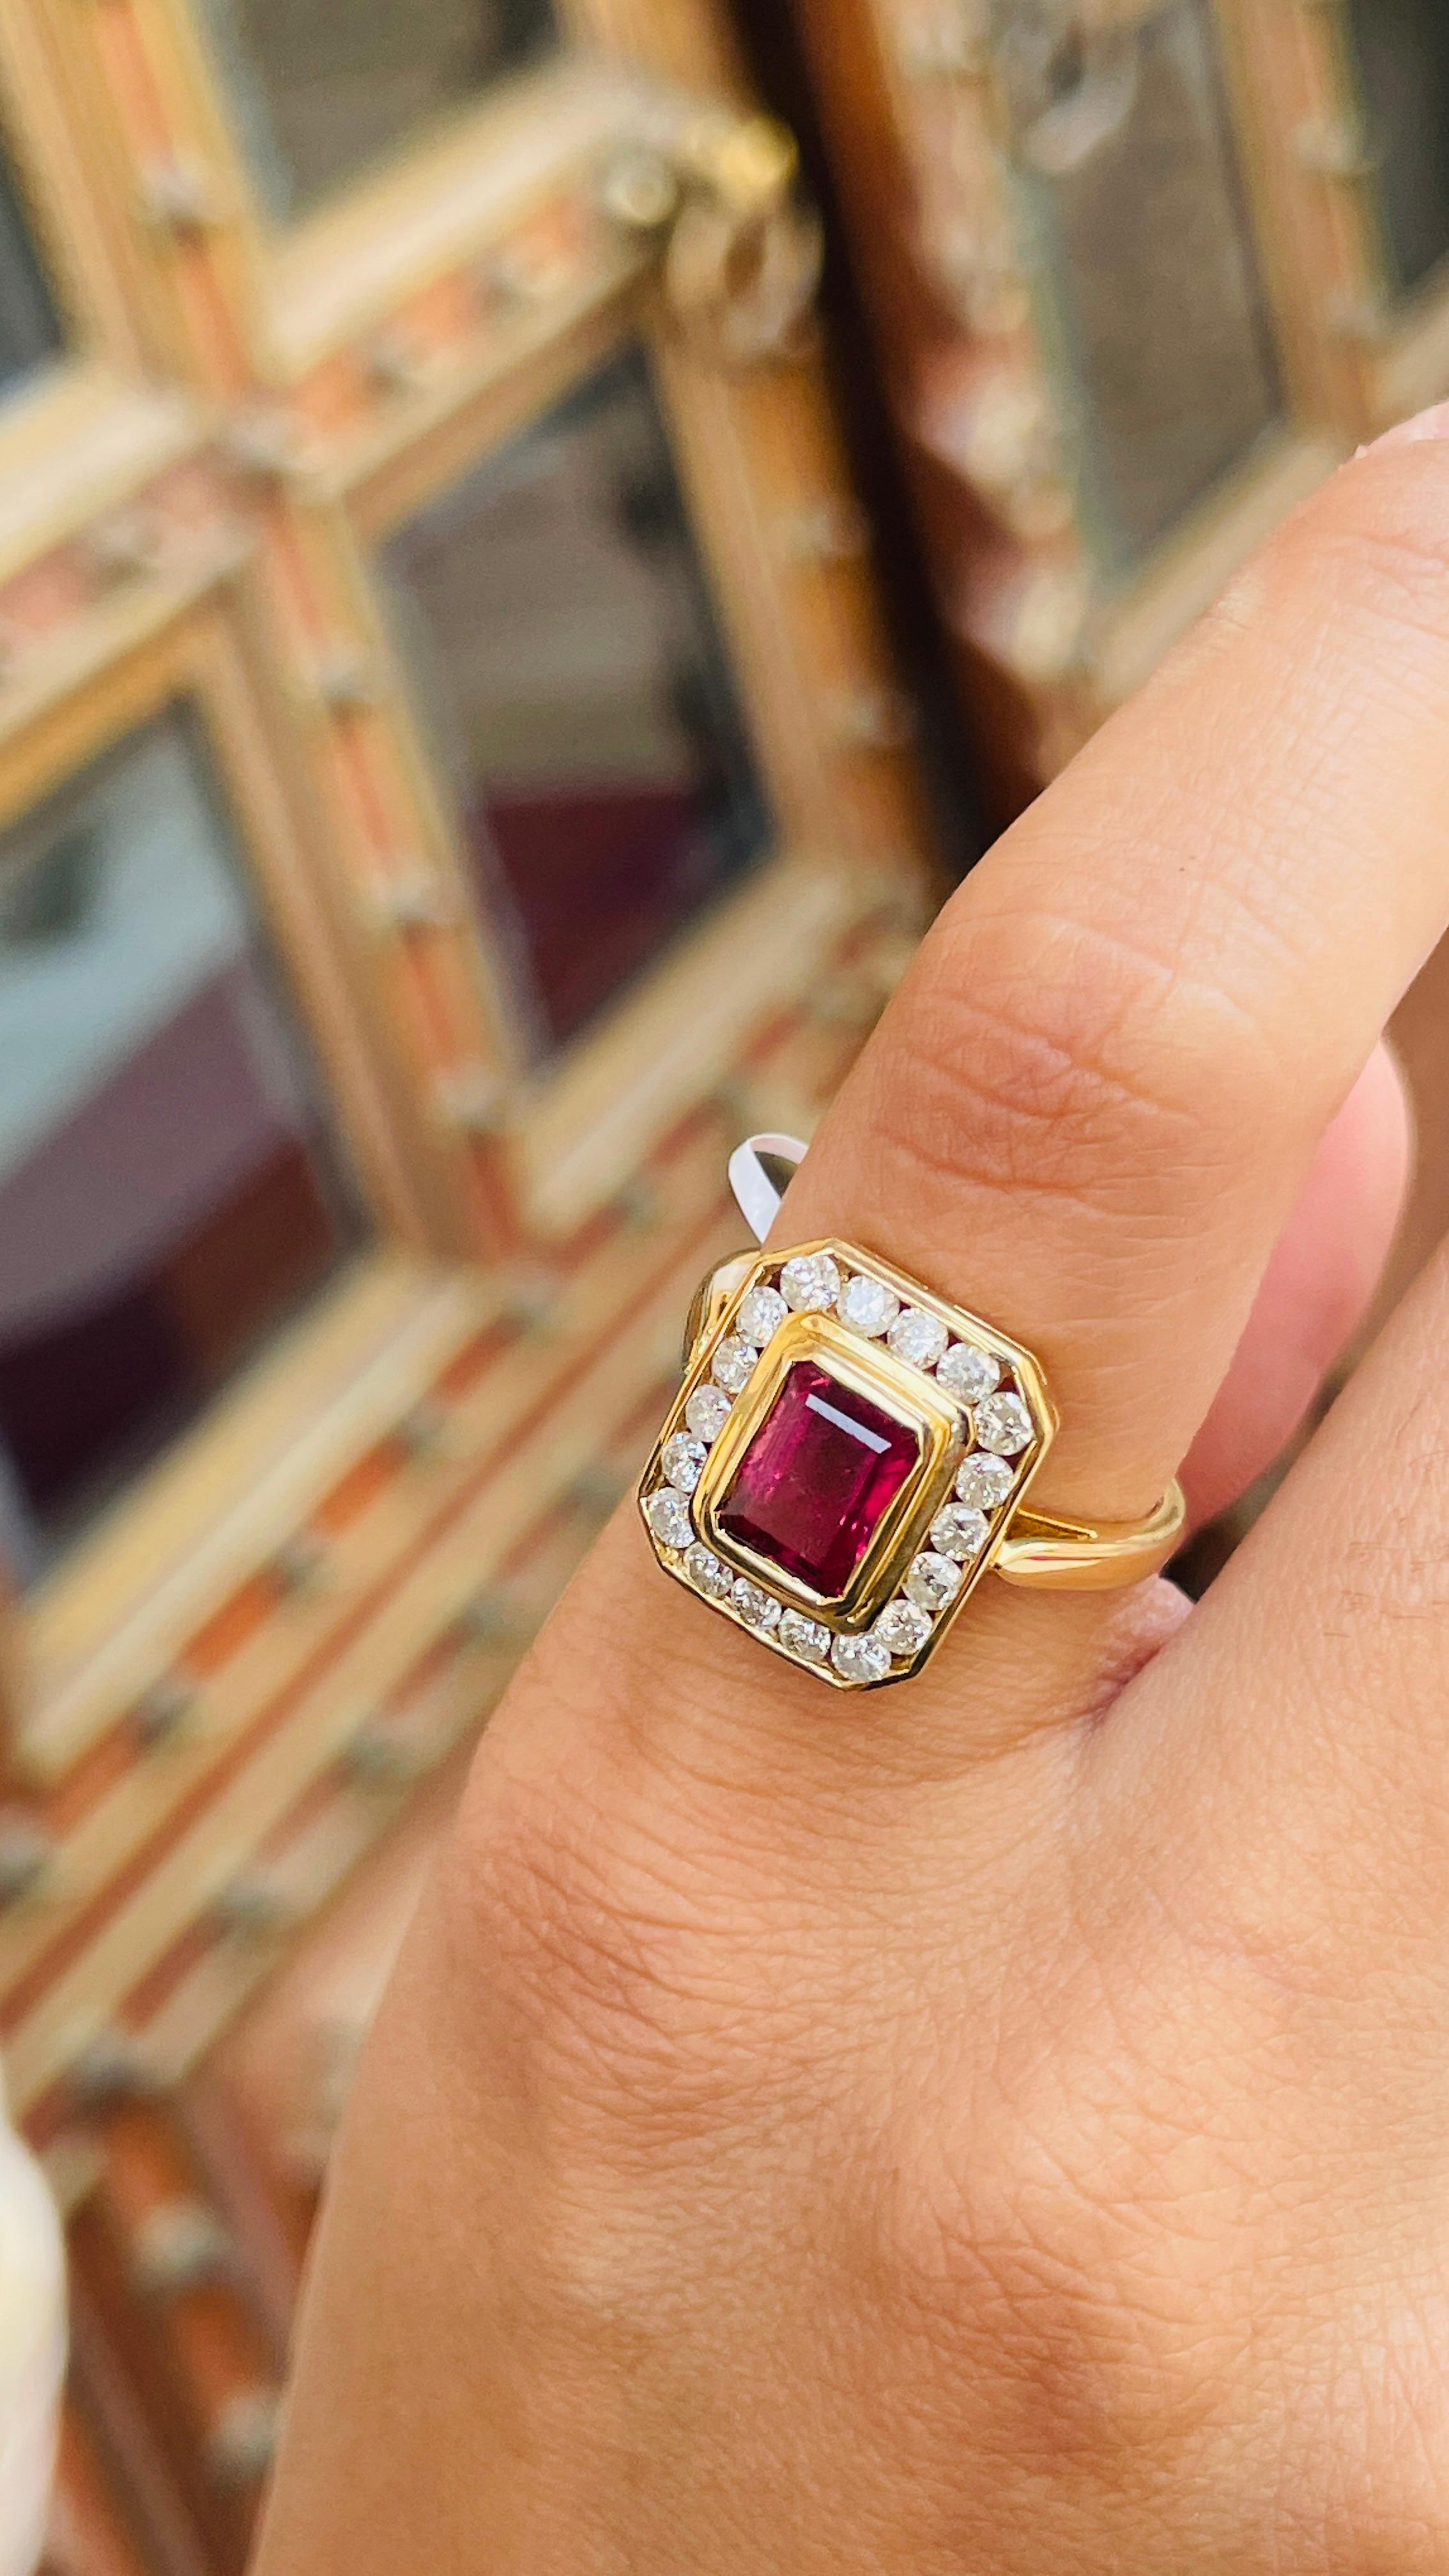 For Sale:  18K Yellow Gold Octagon Cut Ruby Diamond Engagement Ring 11